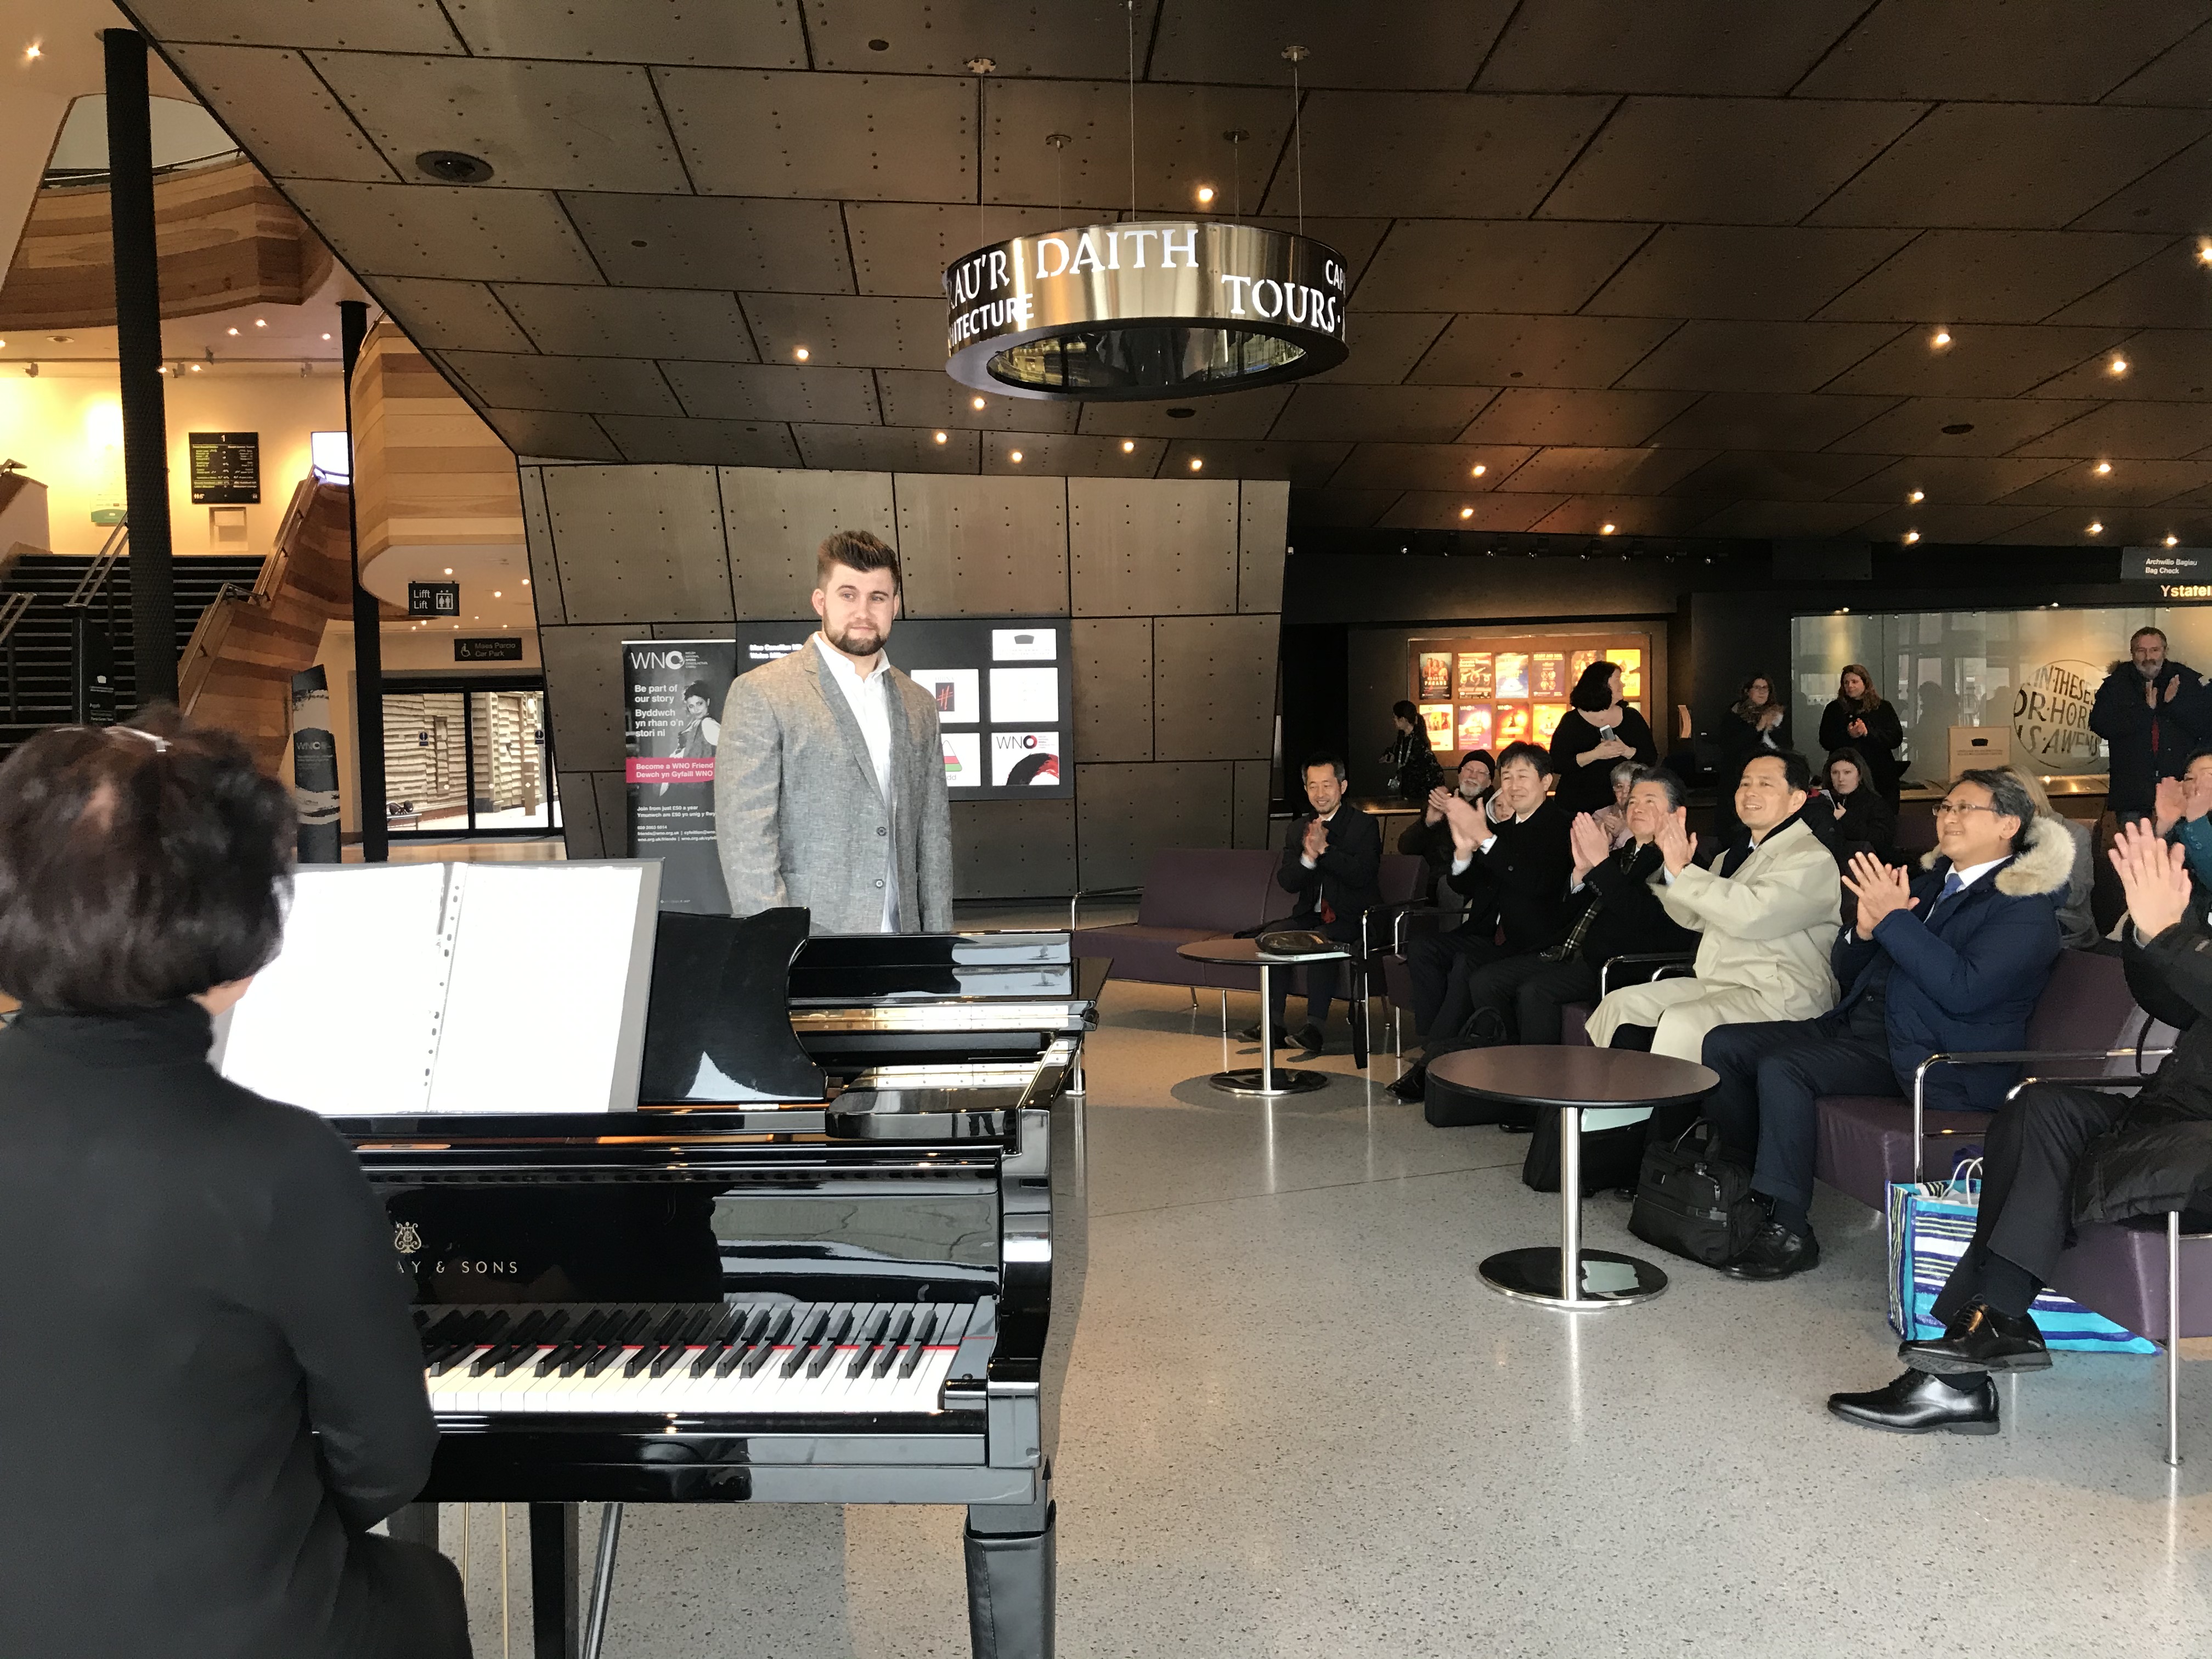 Performance by Rhydian Jenkins, winner of the 2019 Bryn Terfel Urdd Scholarship, for Mayor of Kitakyshua with the region's senior officials visiting Wales in February 2020